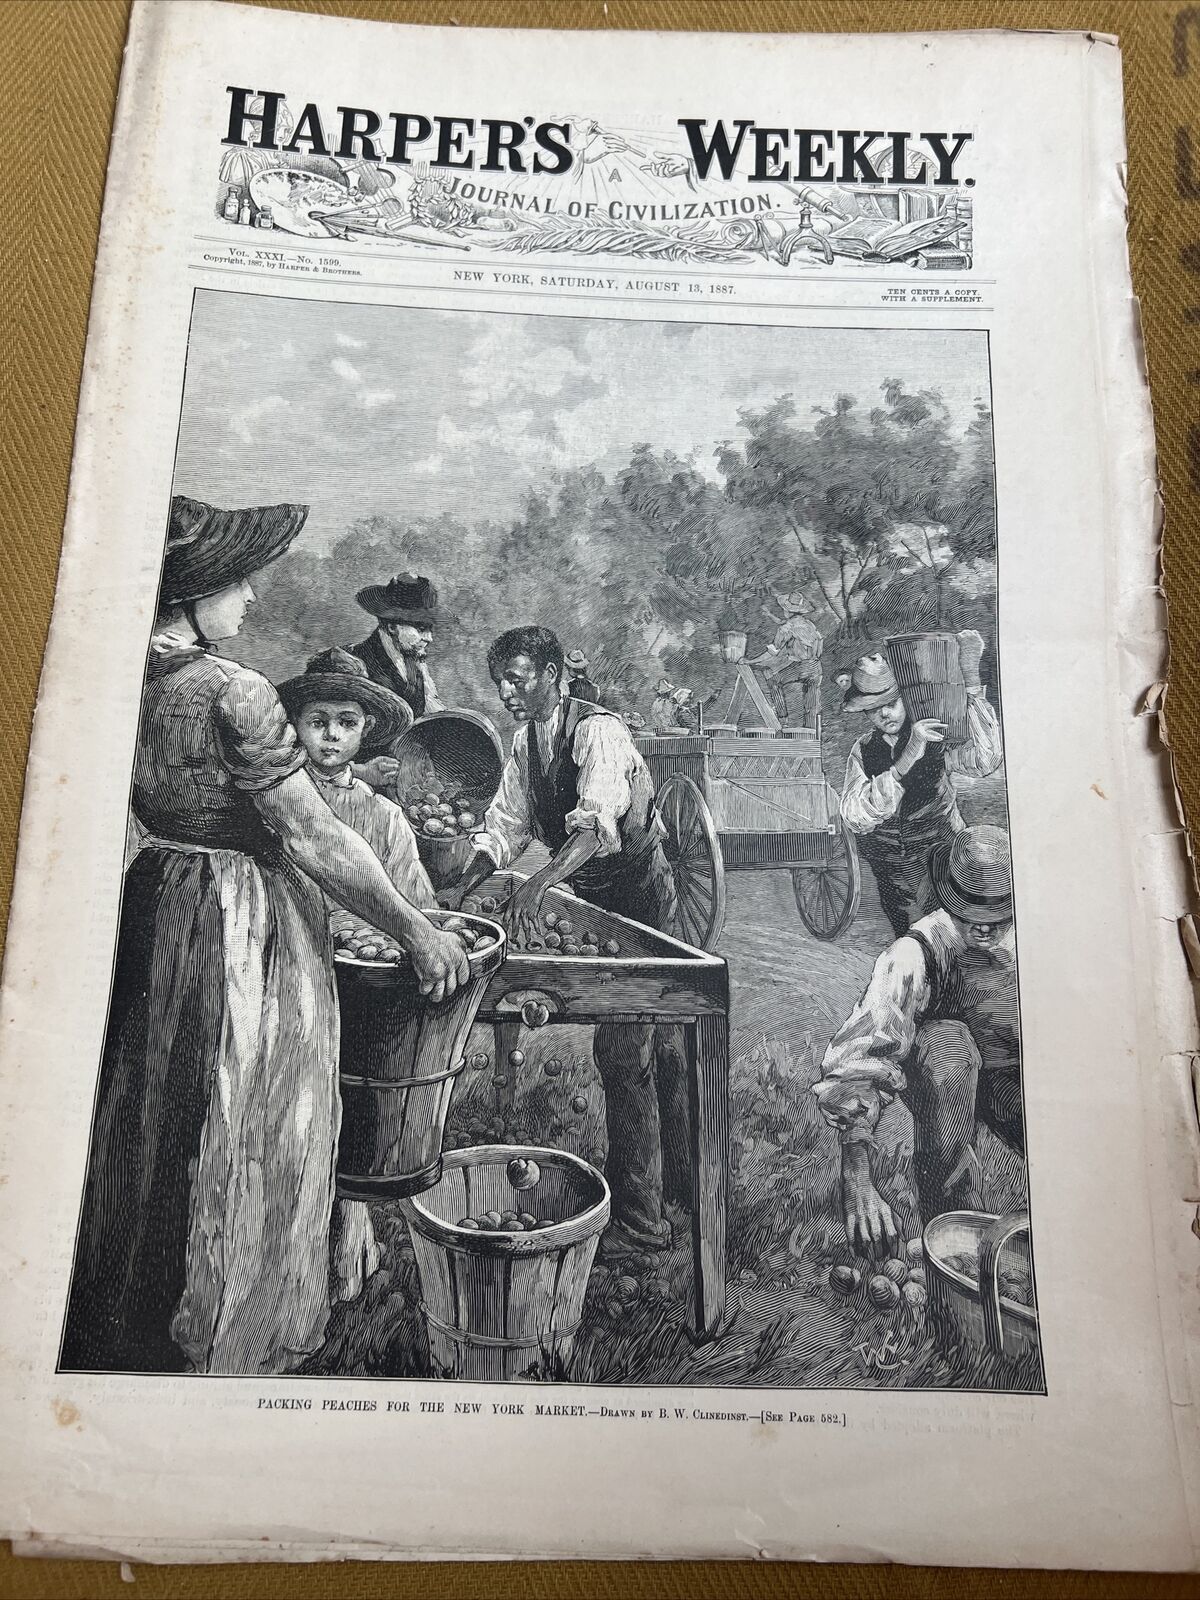 Packing Peaches For NY Market Harper’s Weekly August 13, 1887 fd93